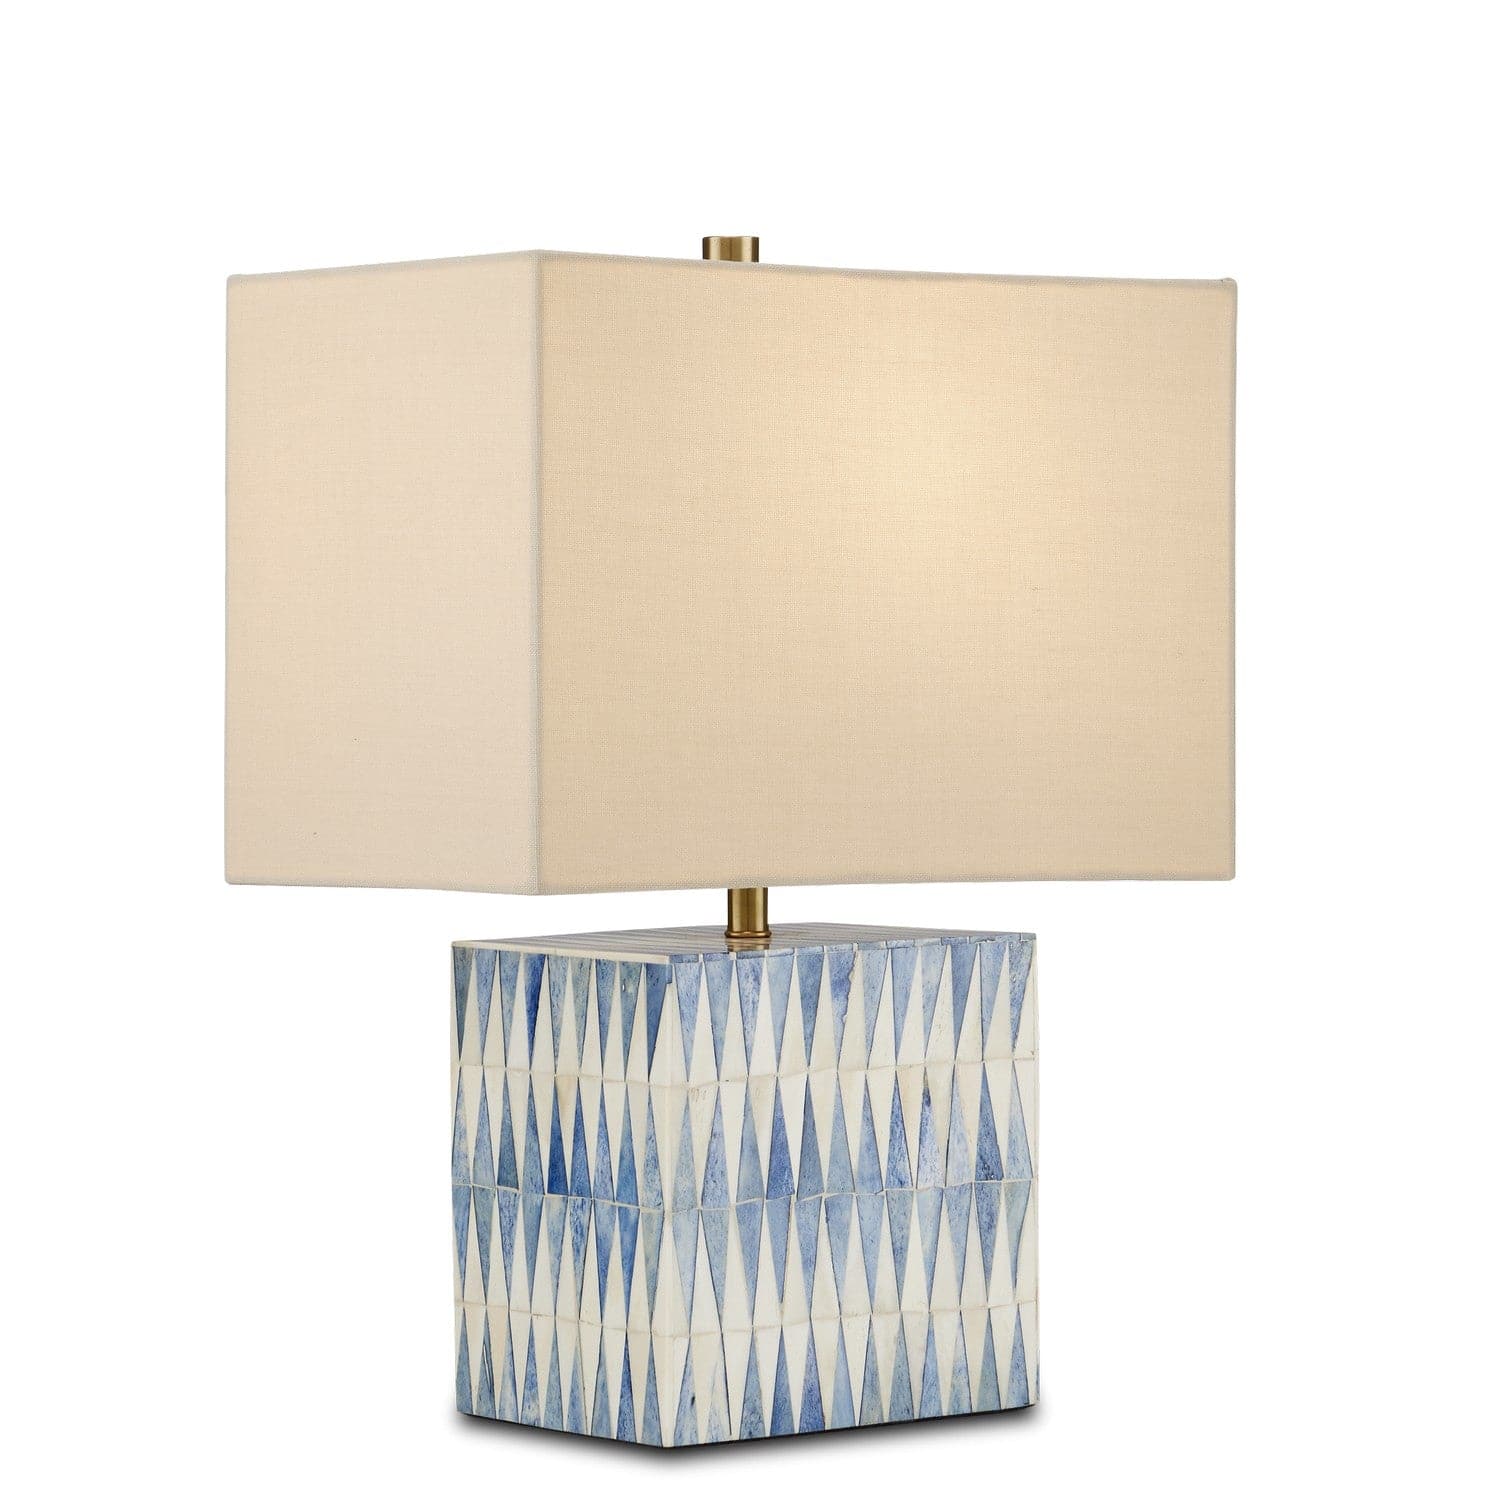 Currey and Company - 6000-0887 - One Light Table Lamp - Blue/White/Brushed Brass